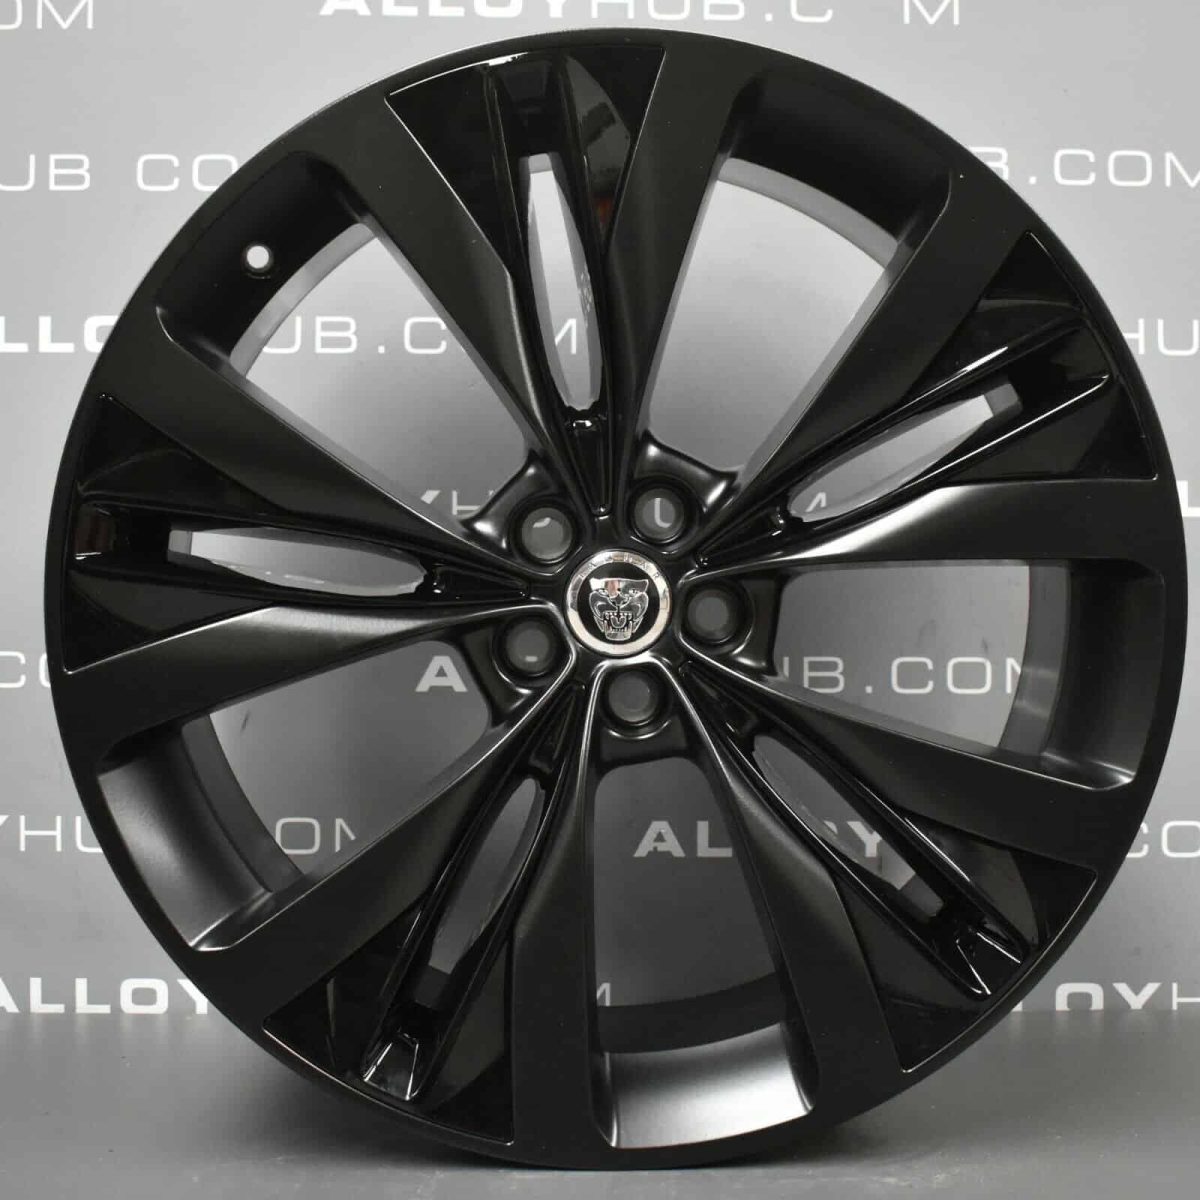 Genuine Jaguar F-Pace Helix Style 1020 10 Spoke 22″ Inch Alloy Wheels with Satin Black Finish T4A858